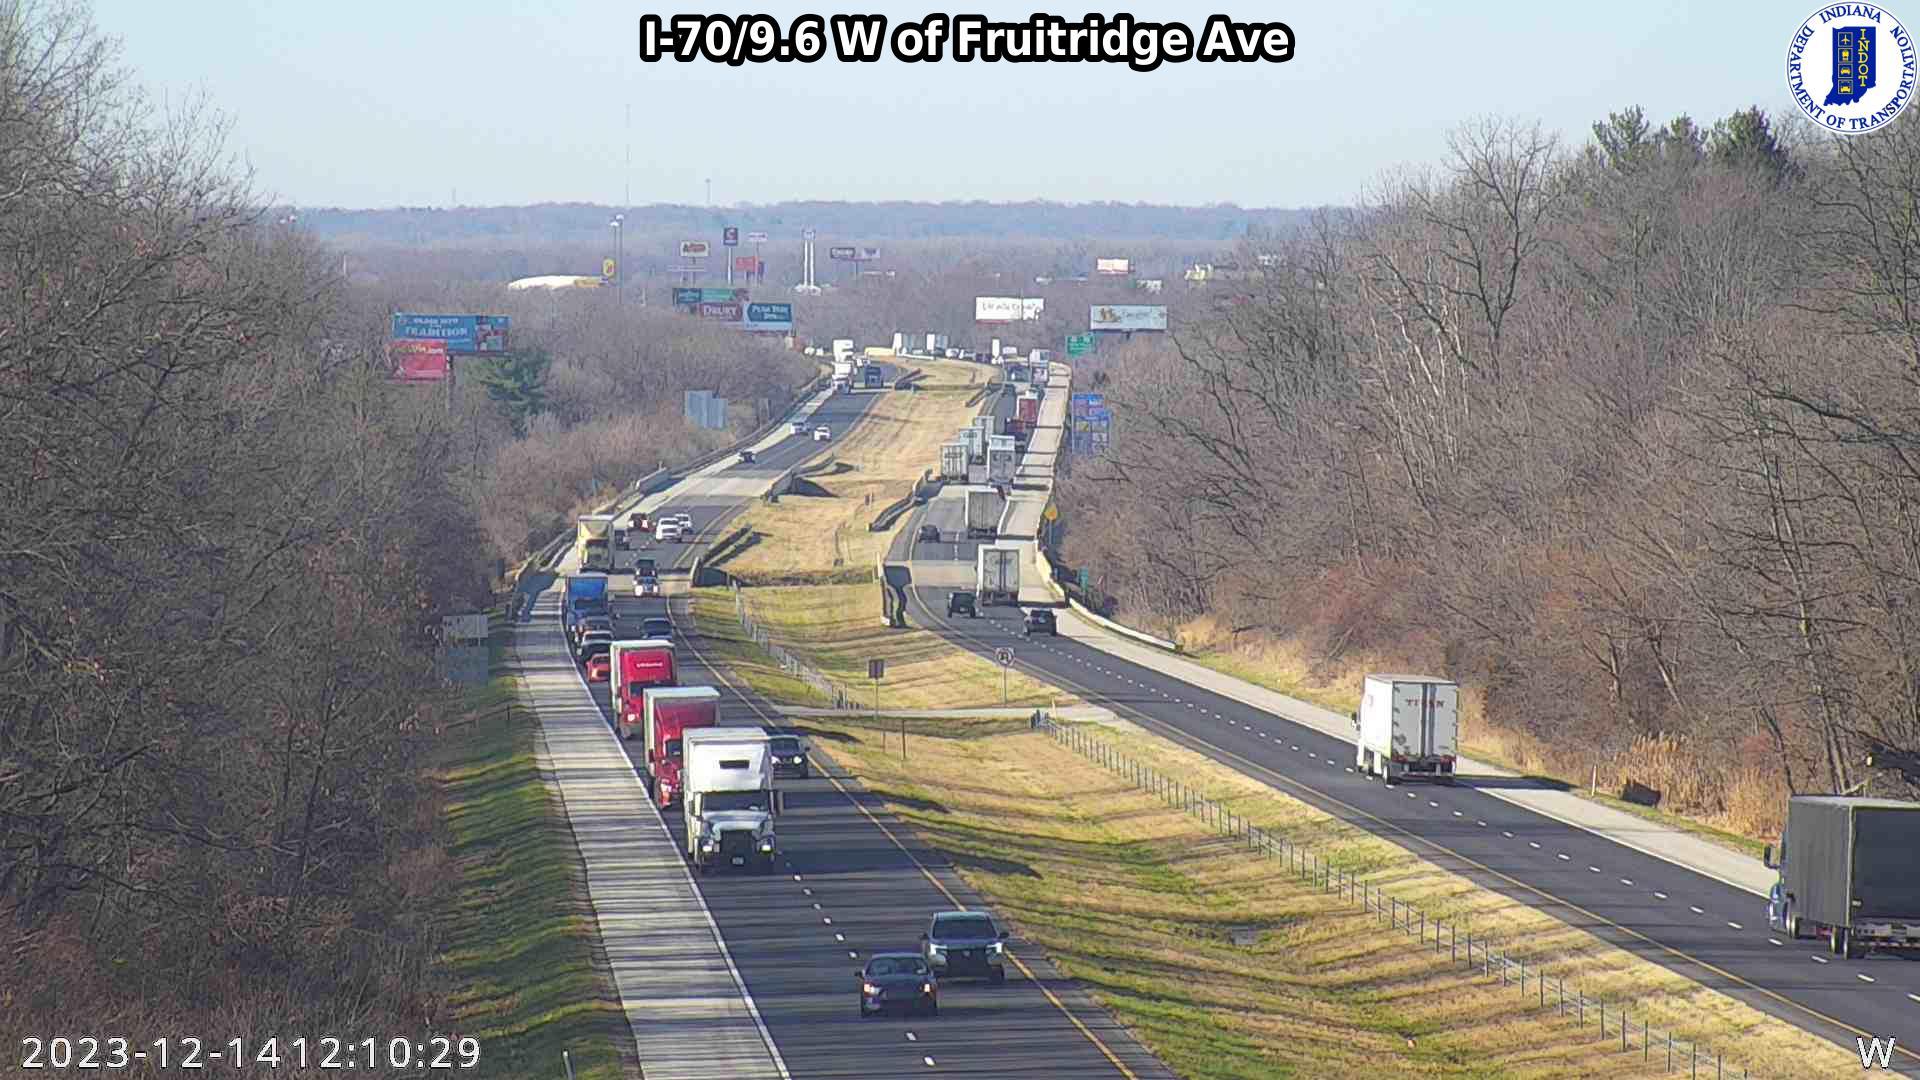 Traffic Cam Spring Hill: I-70: I-70/9.6 W of Fruitridge Ave Player